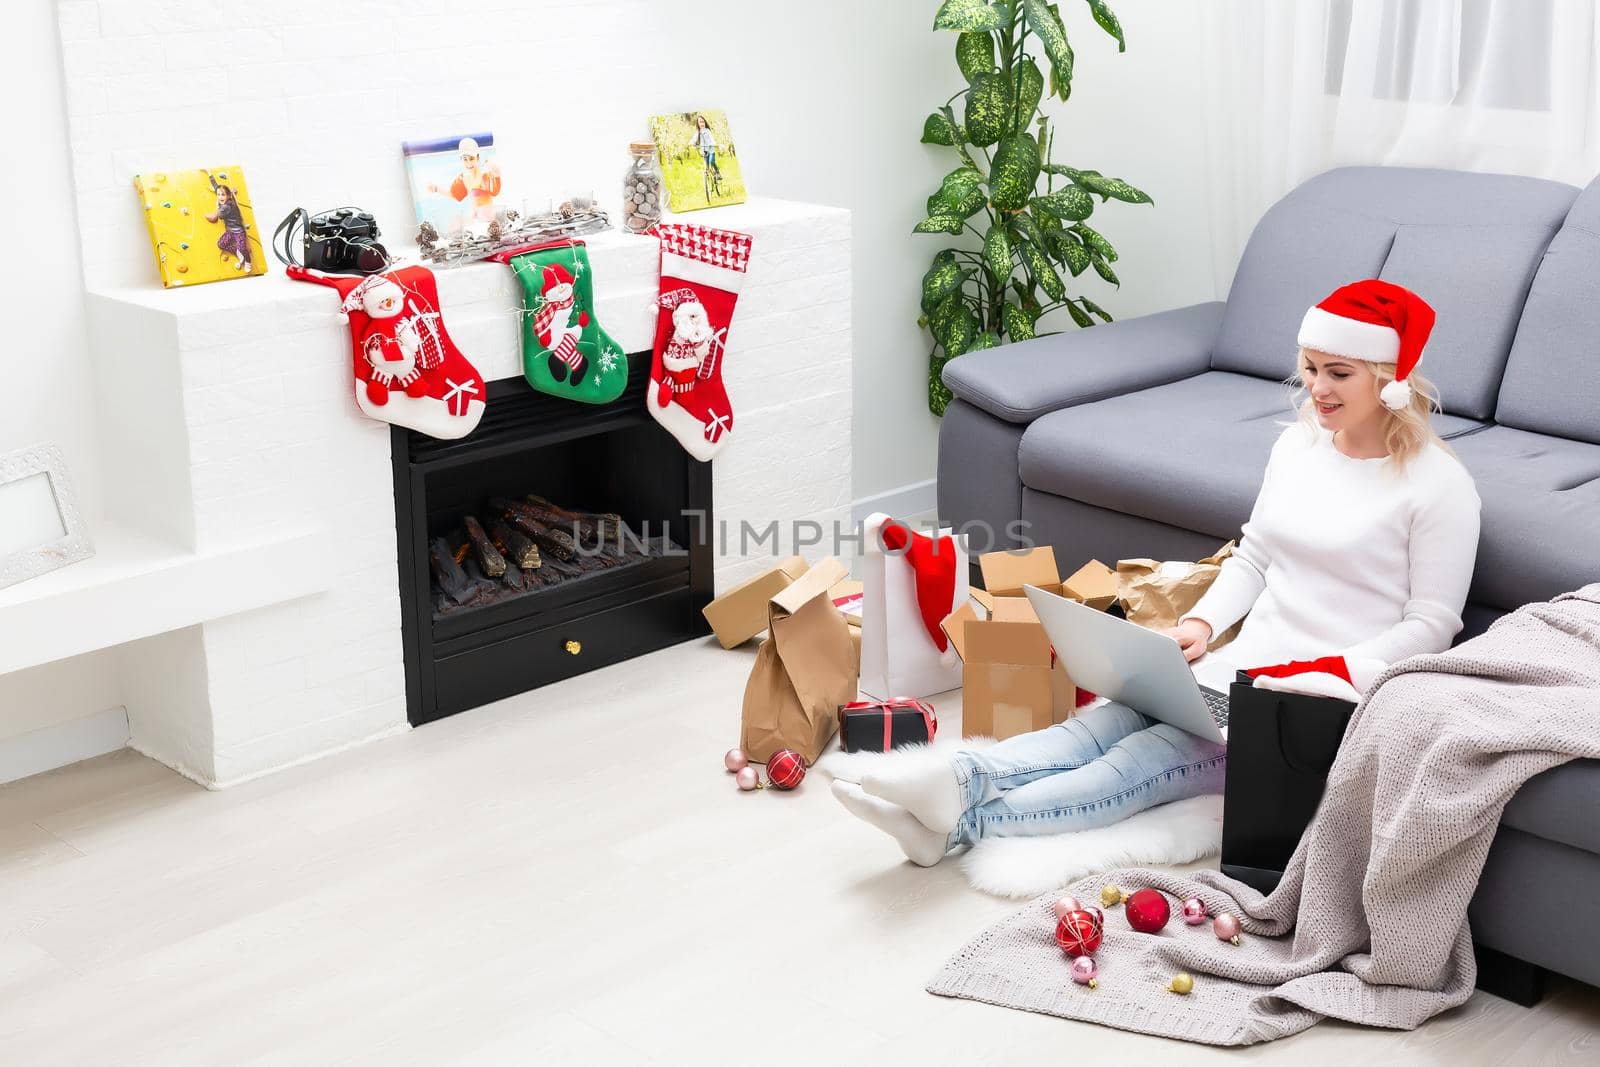 Young woman ordering Christmas gifts online Christmastime decorations by Andelov13